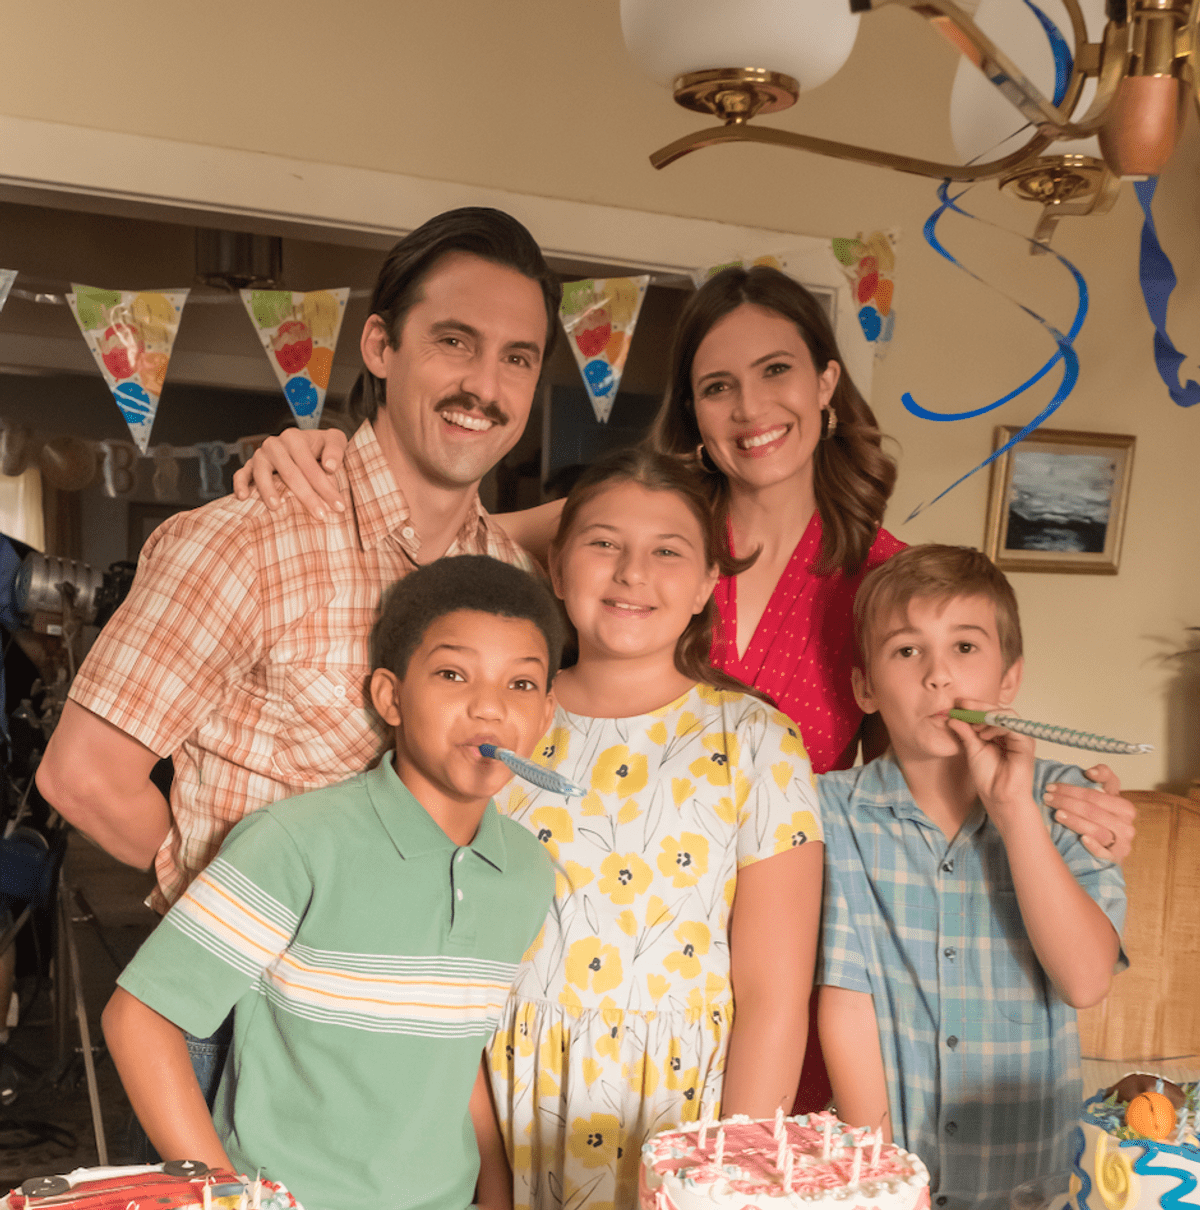 Milo Ventimiglia and Mandy Moore pose with the actors who play young Randall, Kevin and Kate on This Is Us.